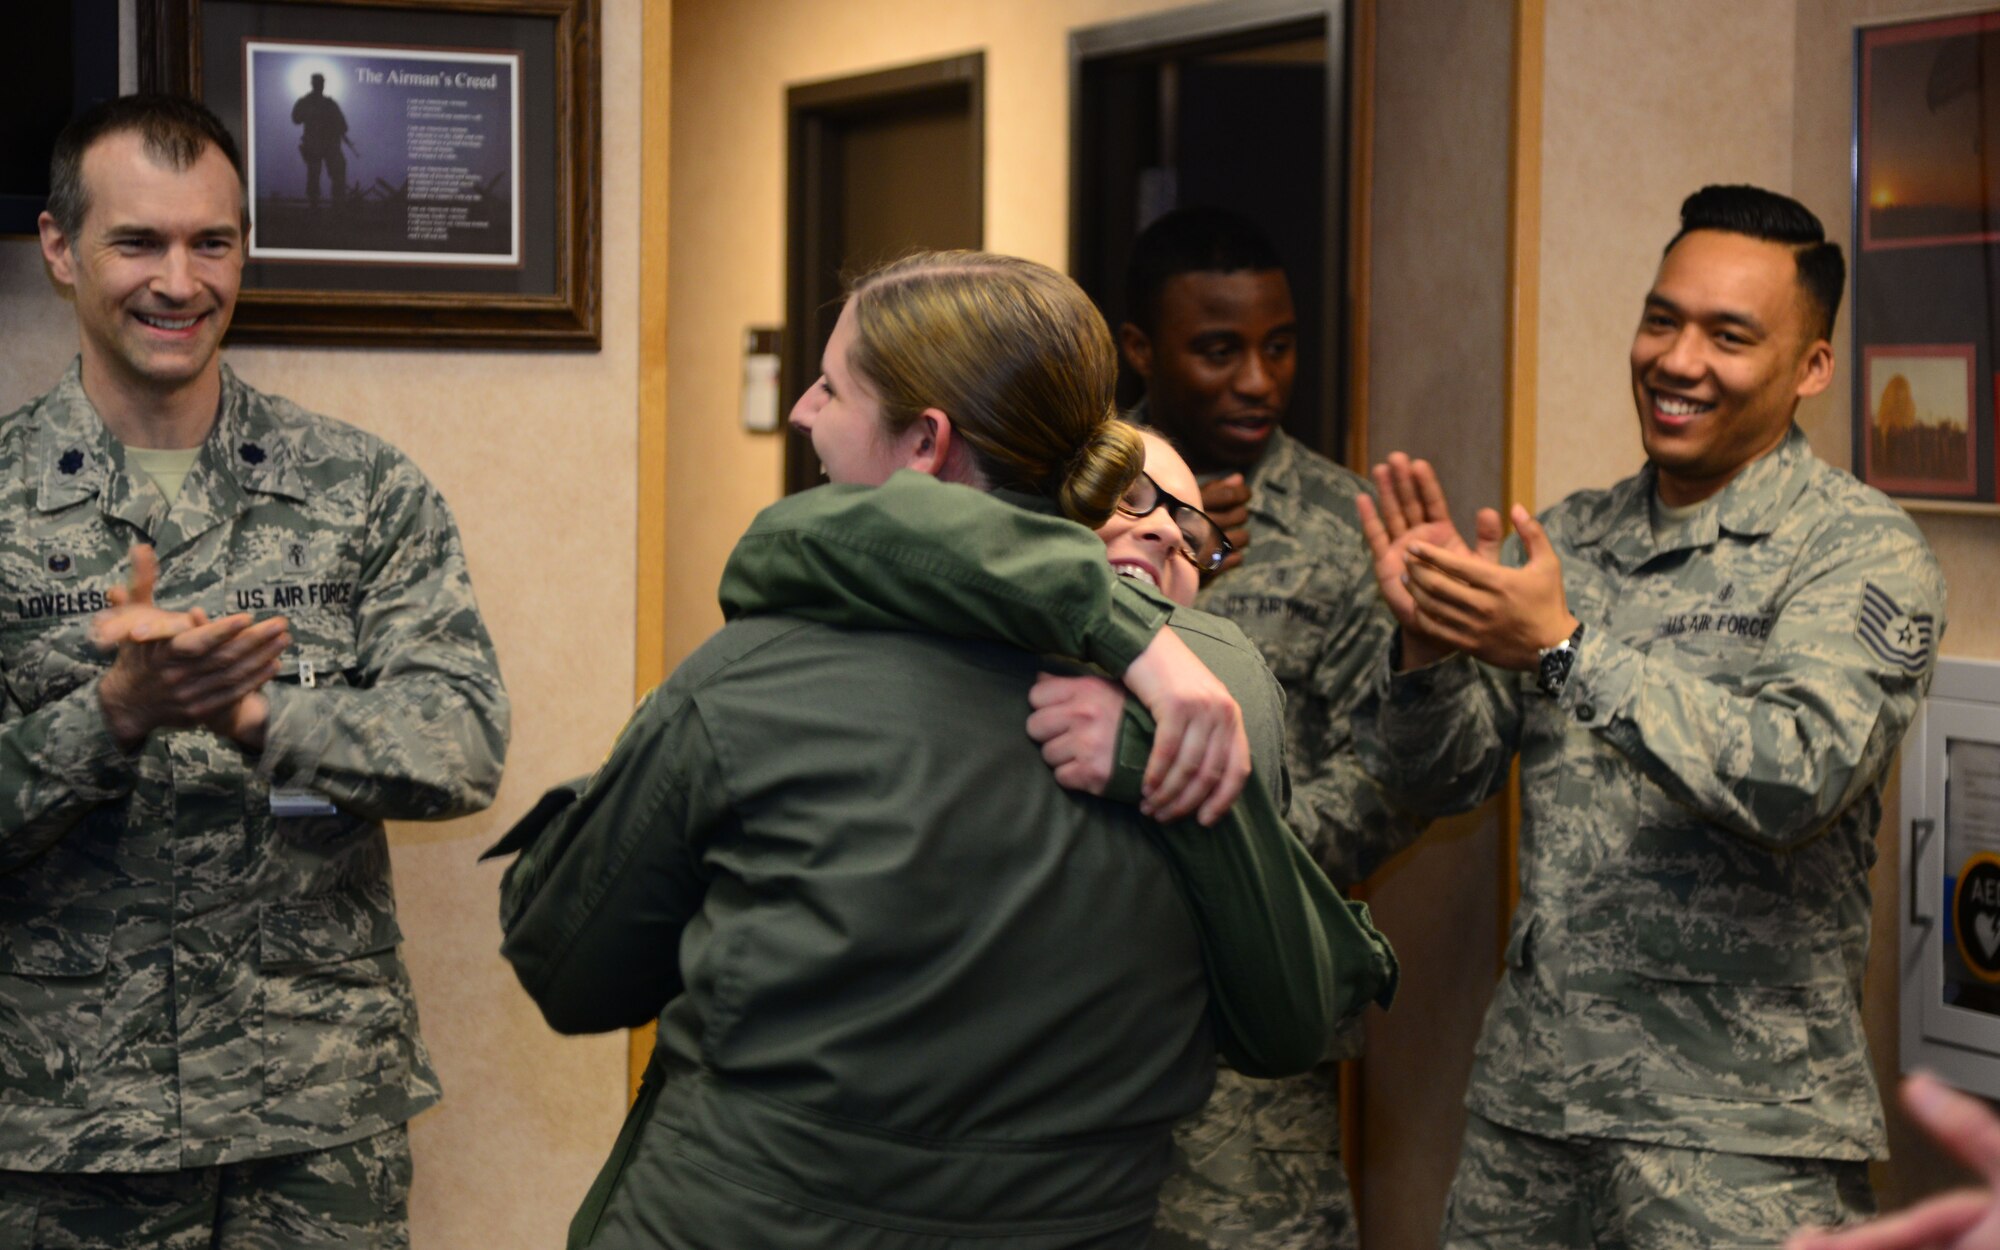 VANCE AIR FORCE BASE, Okla. – Airmen 1st Class Ariel Schlenther, front, and Toni Greka, both 71st Medical Operations Squadron aerospace physiology technicians, hug after finding out they were both selected for below-the-zone promotions. Airmen selected for below-the-zone promotions sew on their senior airman stripes six months early. (U.S. Air Force photo/Senior Airman Frank Casciotta)